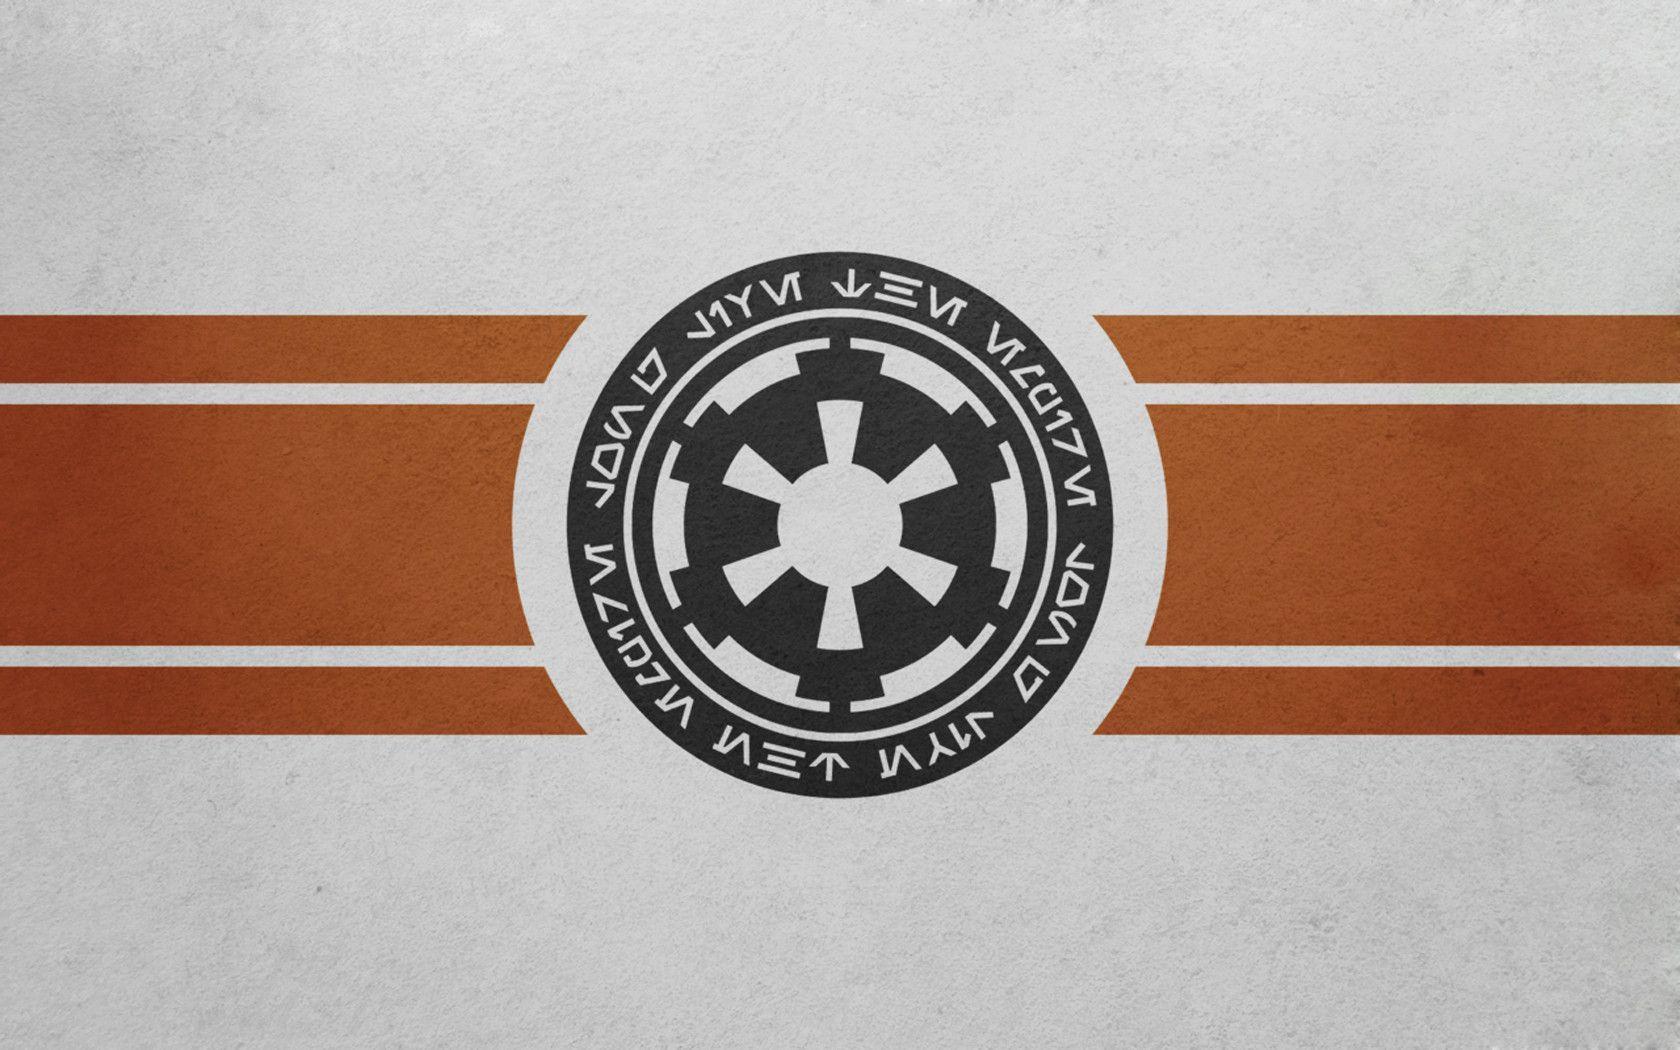 Star Wars Empire Wallpapers Top Free Star Wars Empire Backgrounds Wallpaperaccess